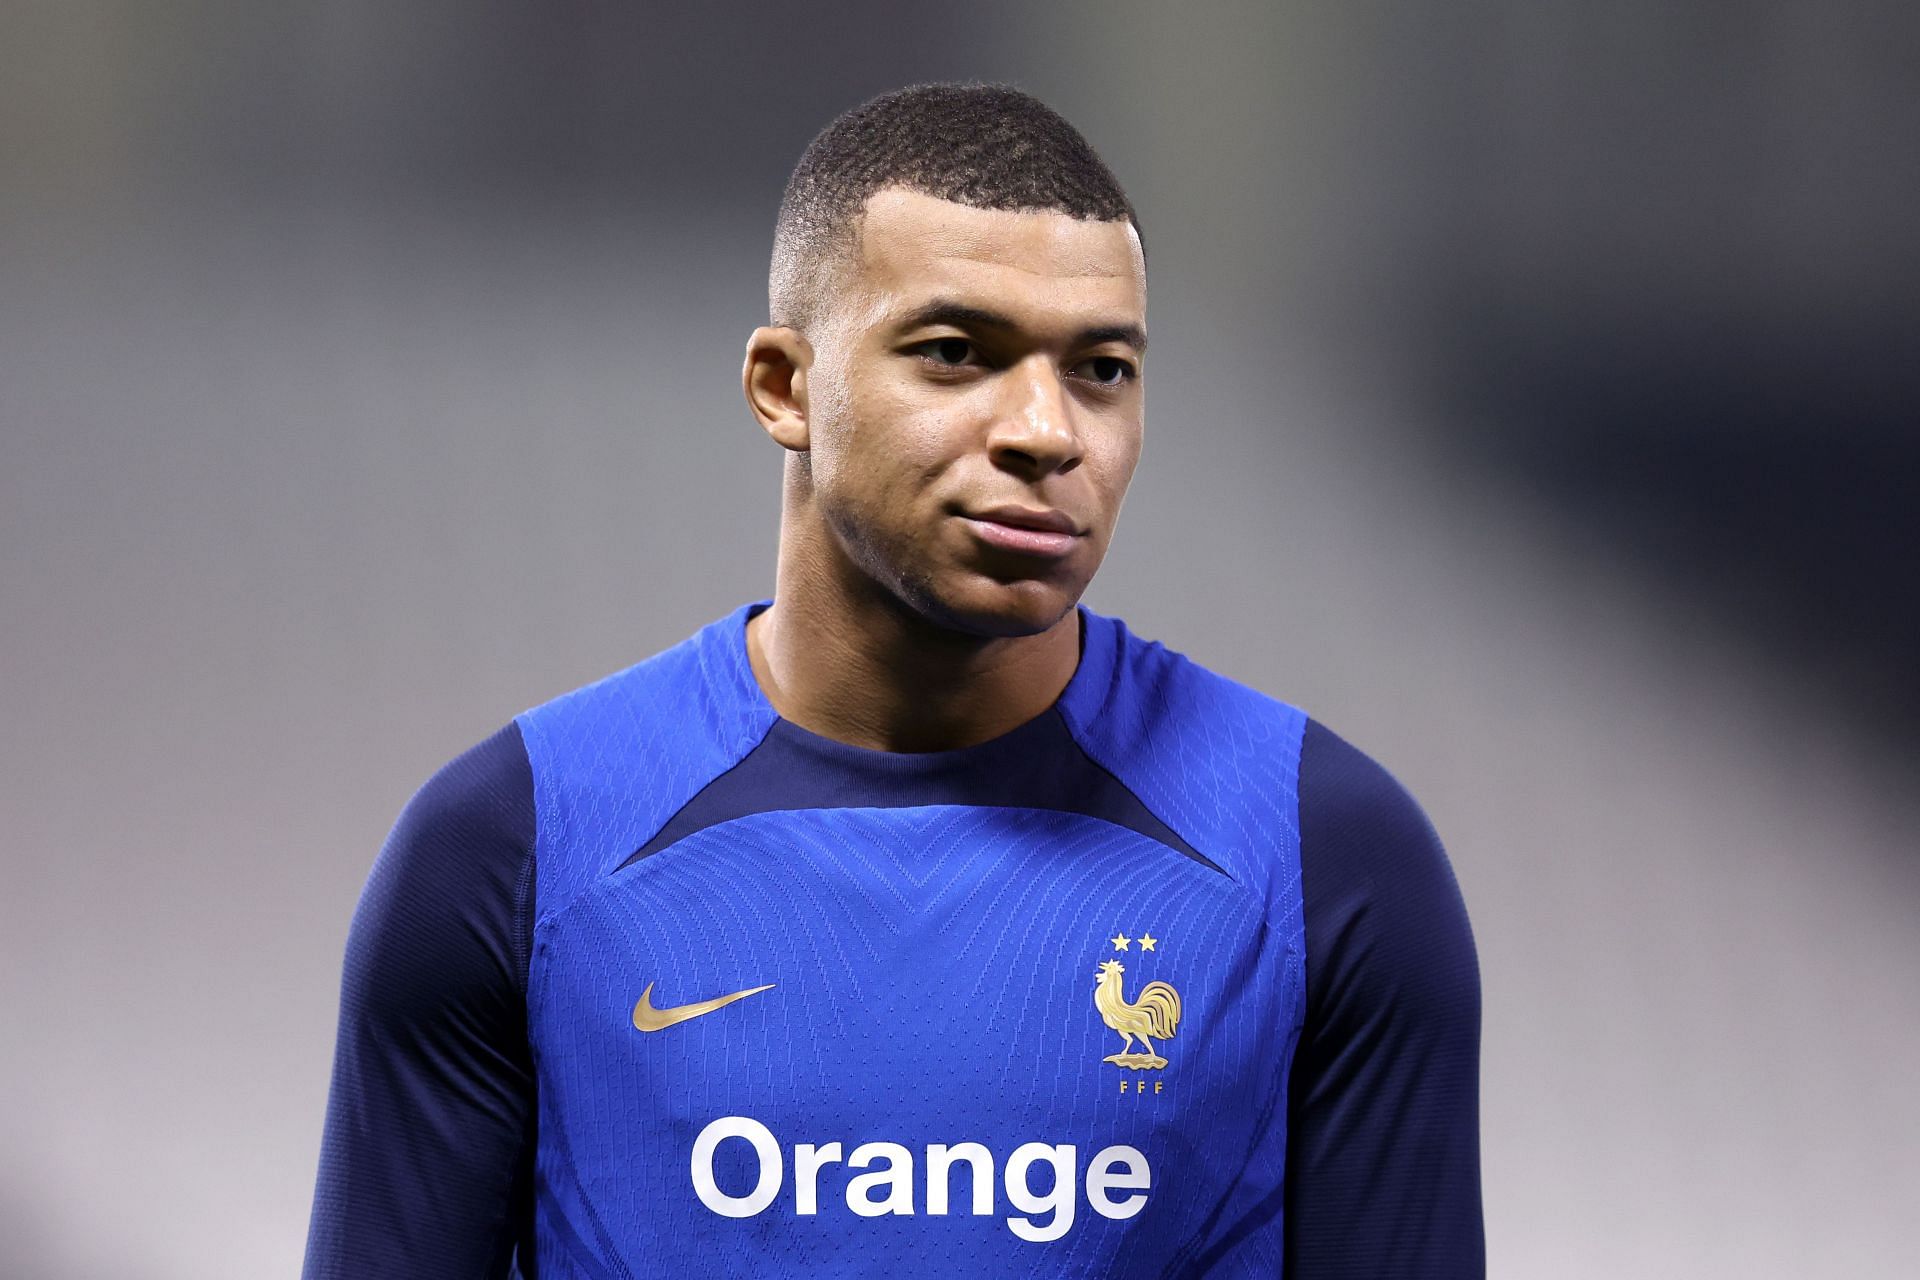 Mbappe and Hakimi will collide at the World Cup.